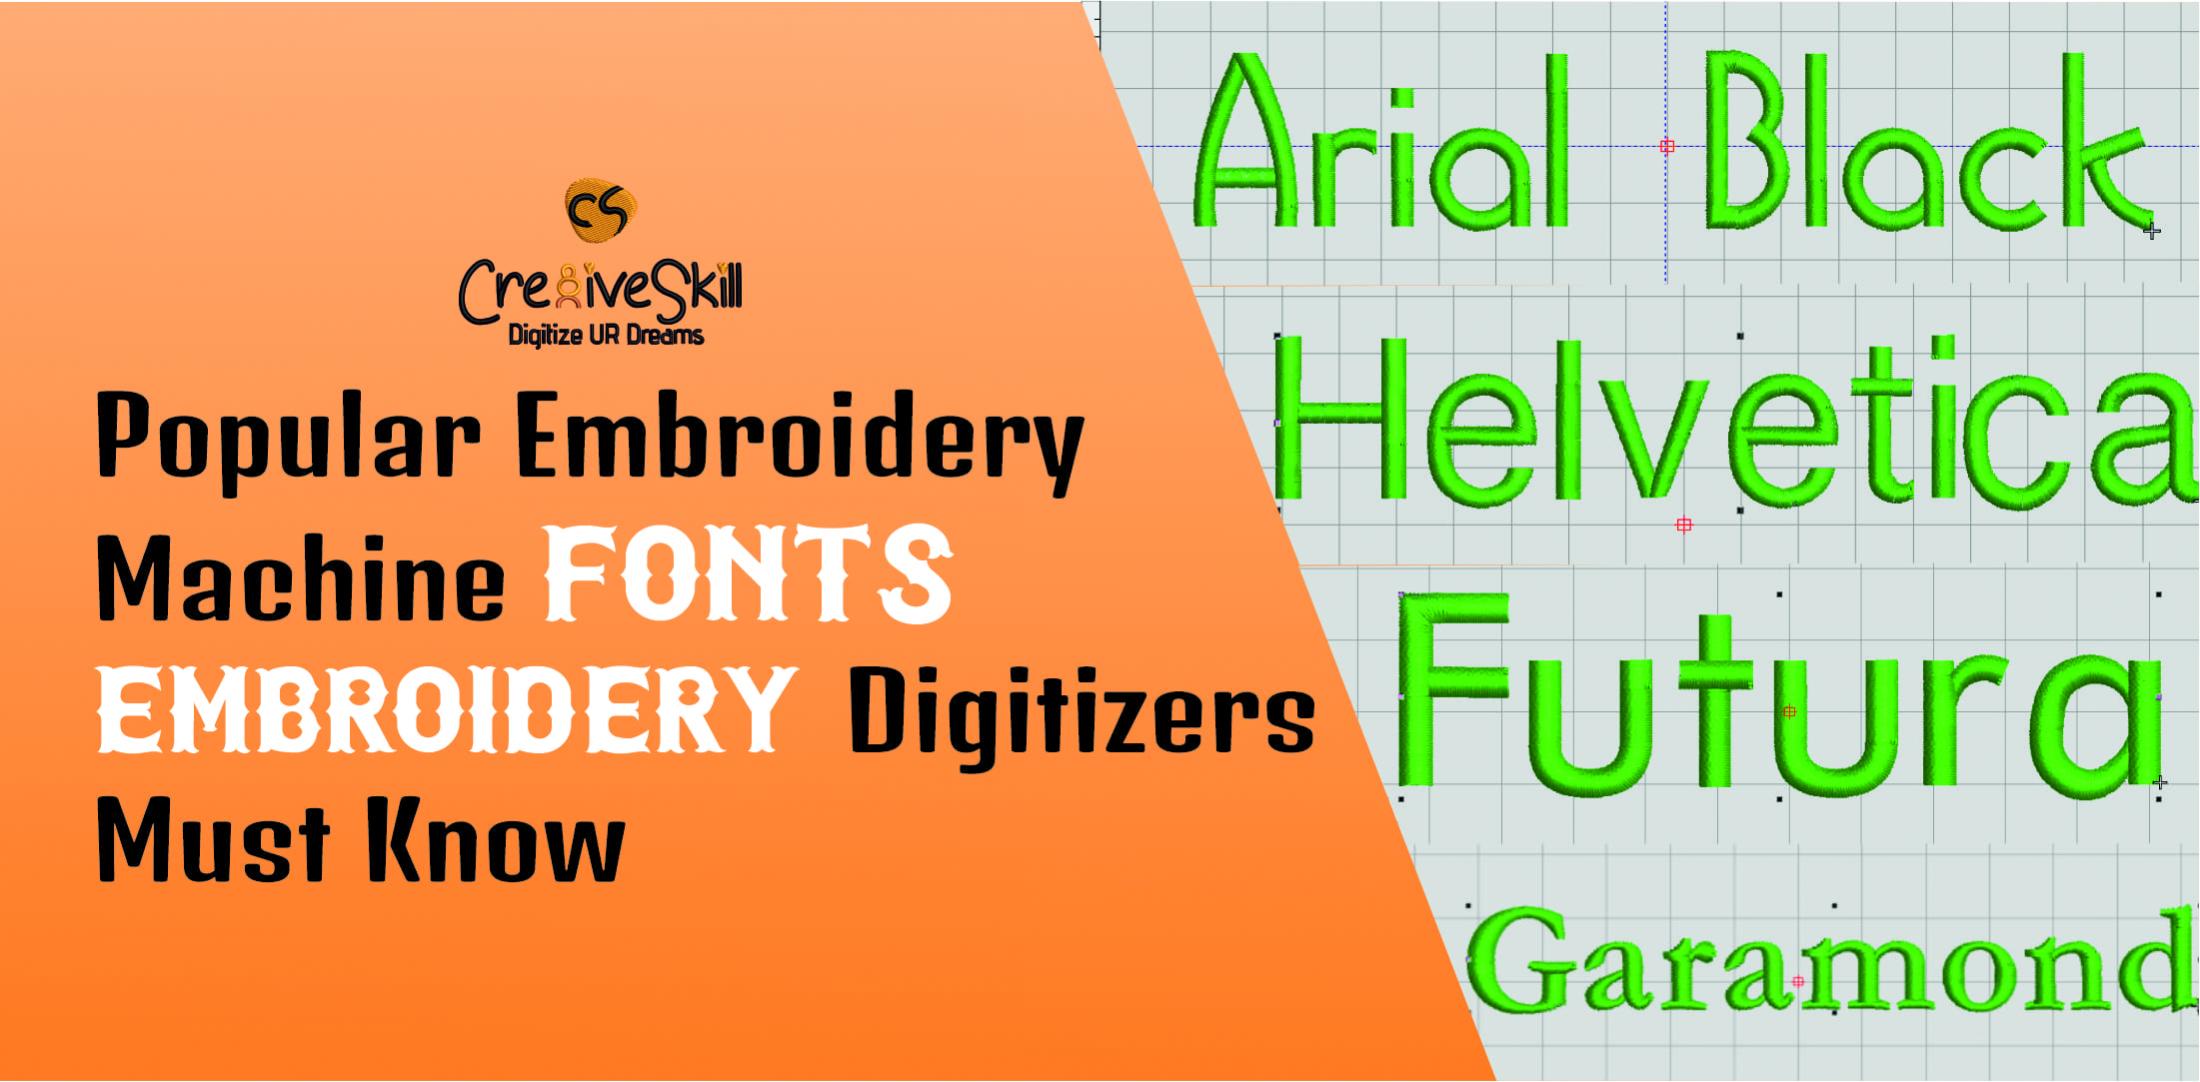 Popular Embroidery Machine Fonts Embroidery Digitizer Must Know | Cre8iveSkill